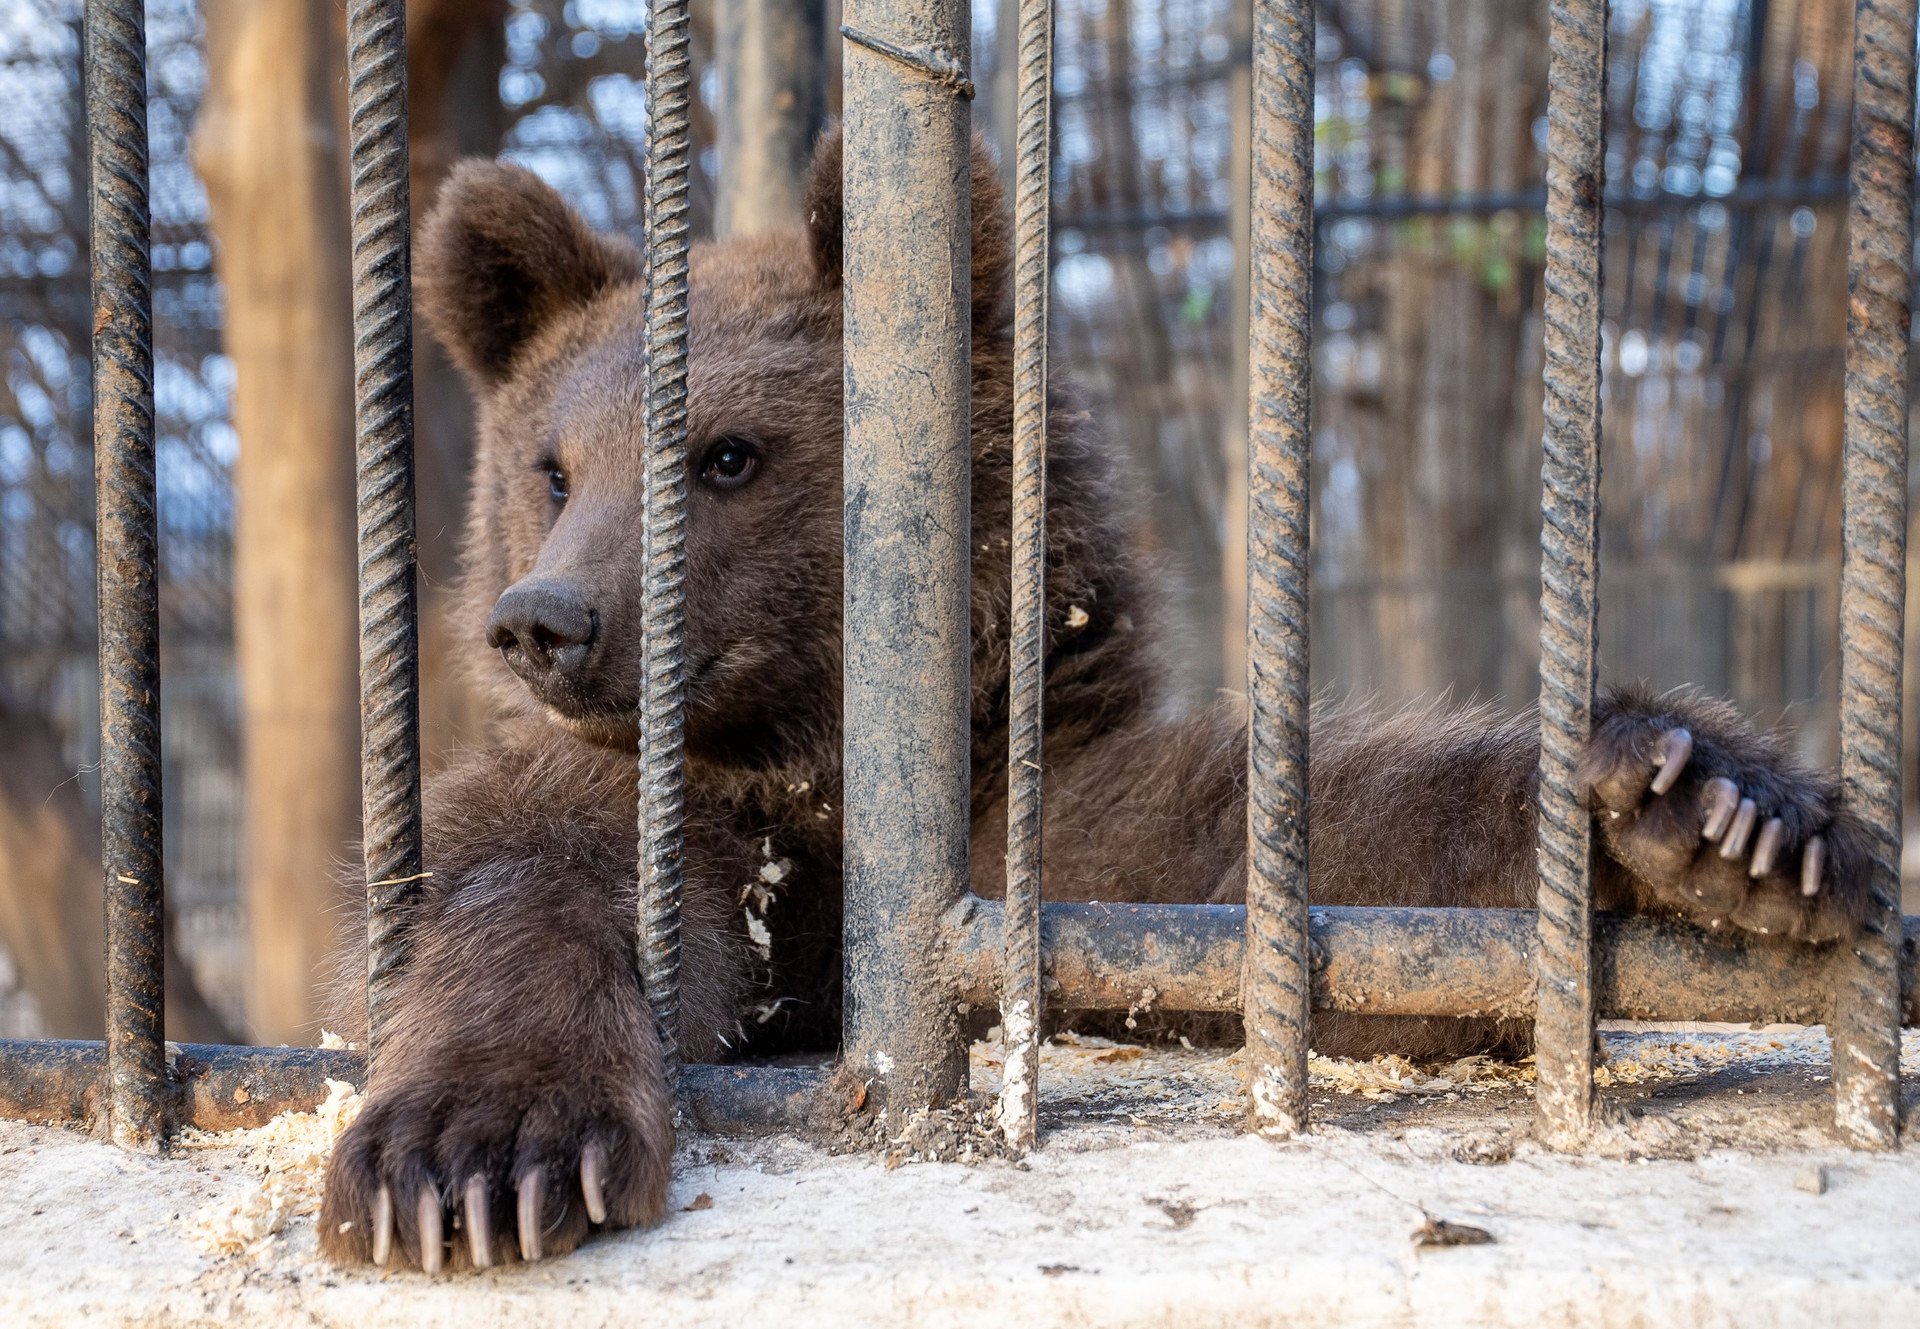 Brown bear reaching out of cage in Azerbaijan